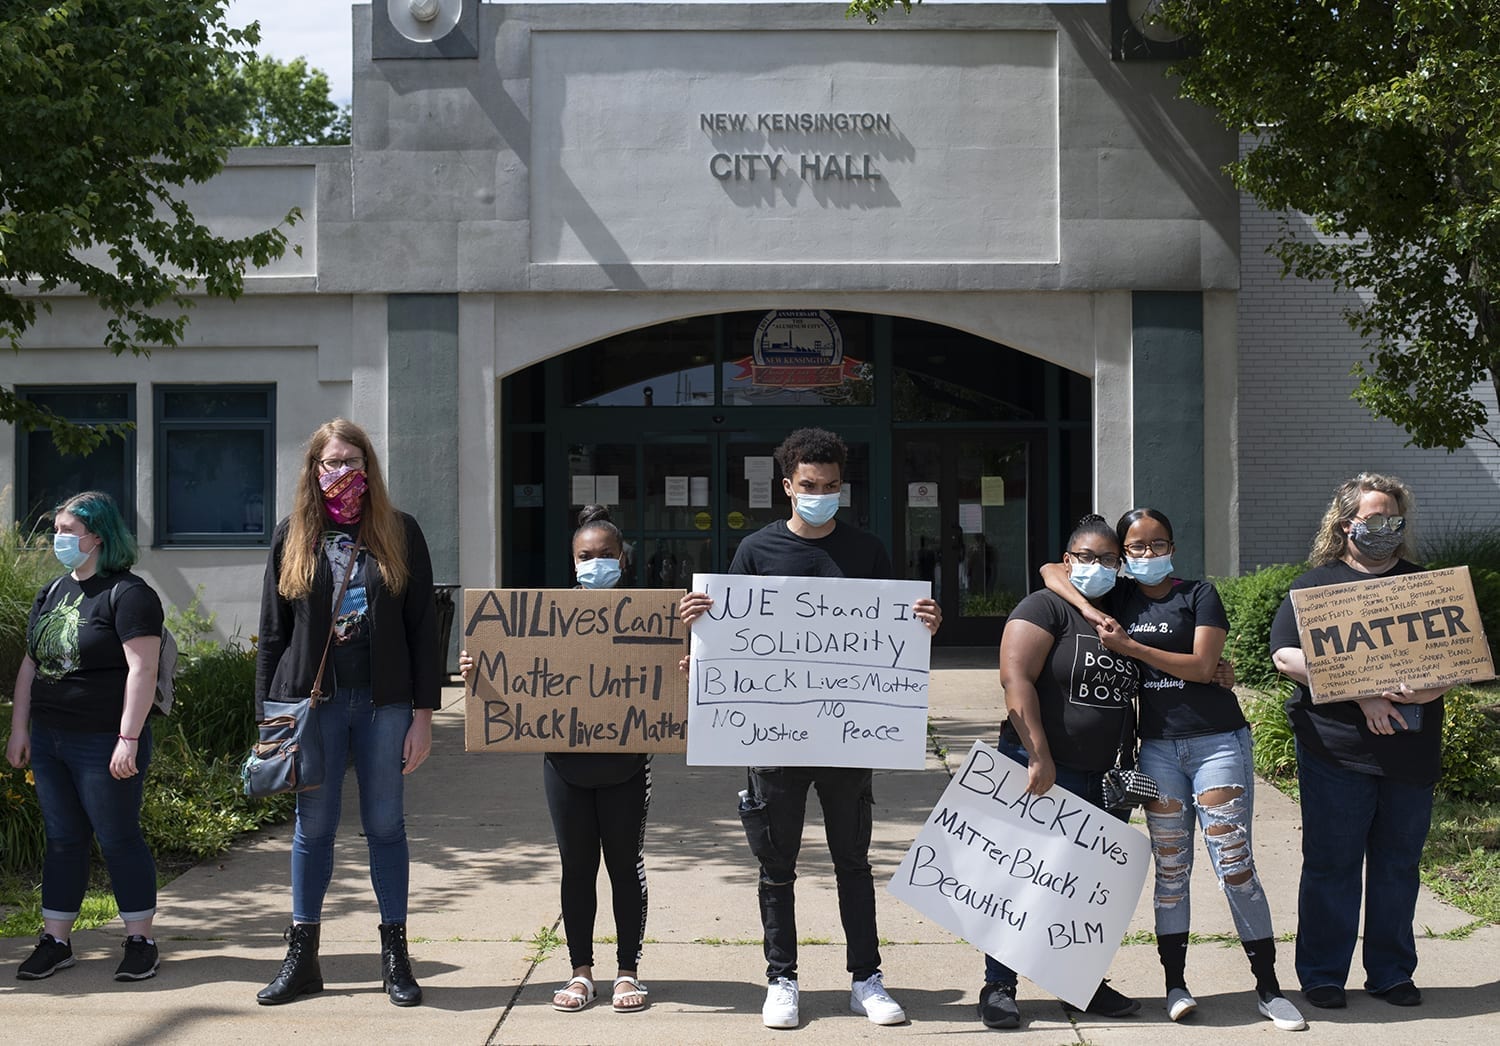 Protestors line up around City Hall for a silent 8:46 minutes to remember George Floyd following a peaceful protest for Black Lives Matter in New Kensington, Pa. (Photograph/Martha Rial)